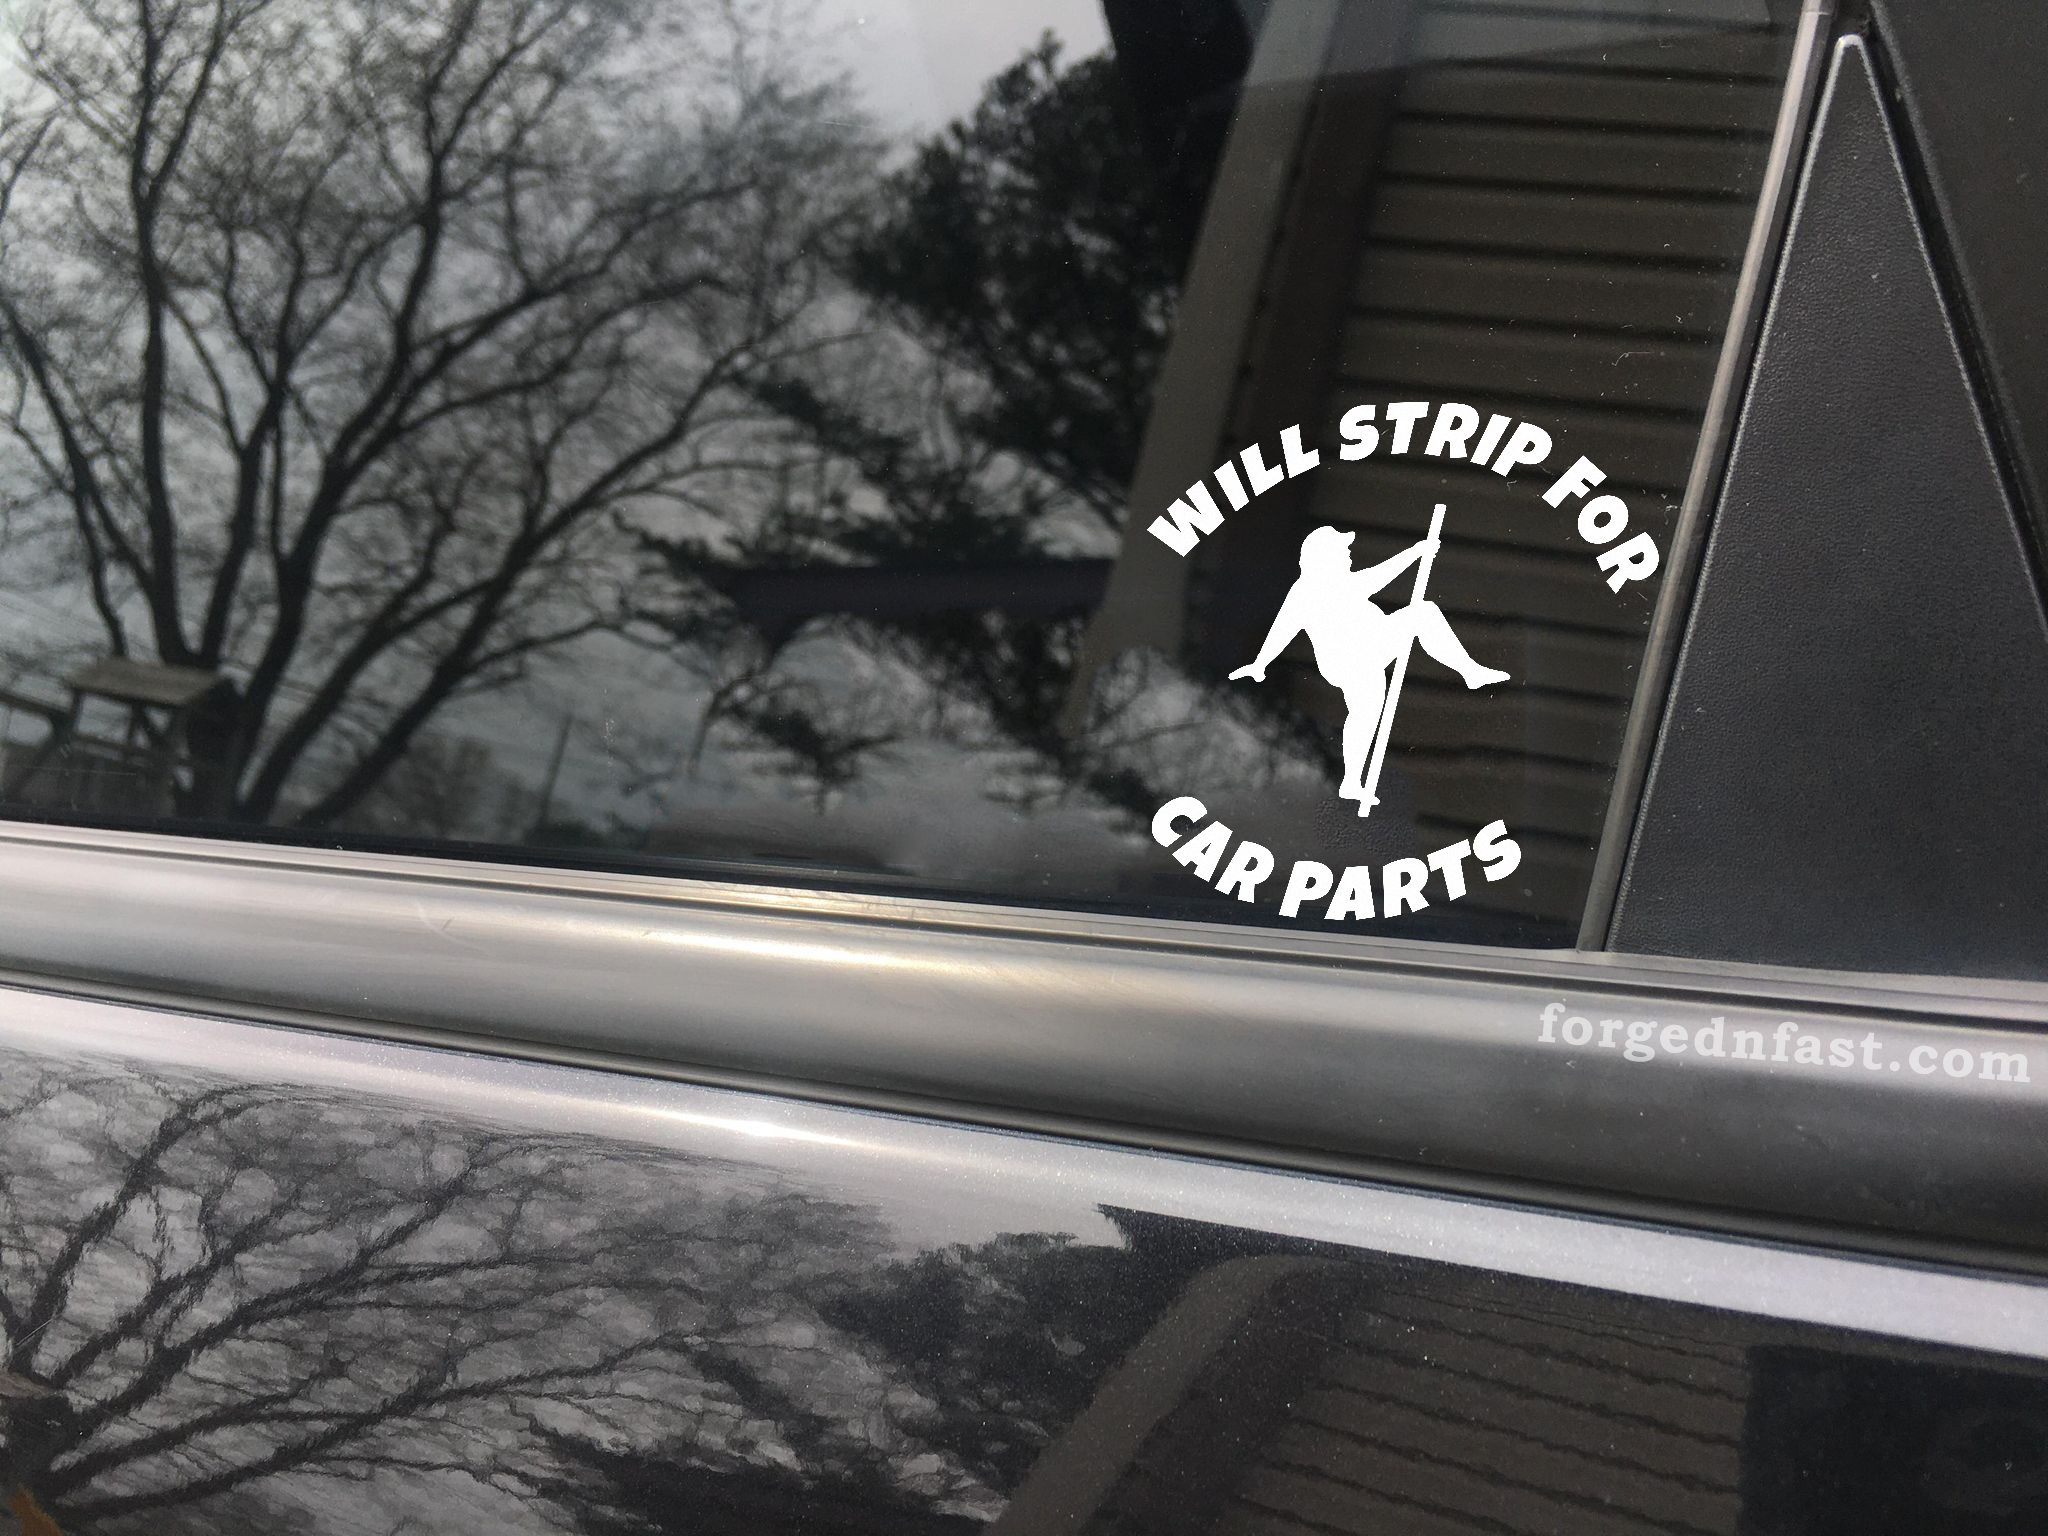 will stirp for car parts decal